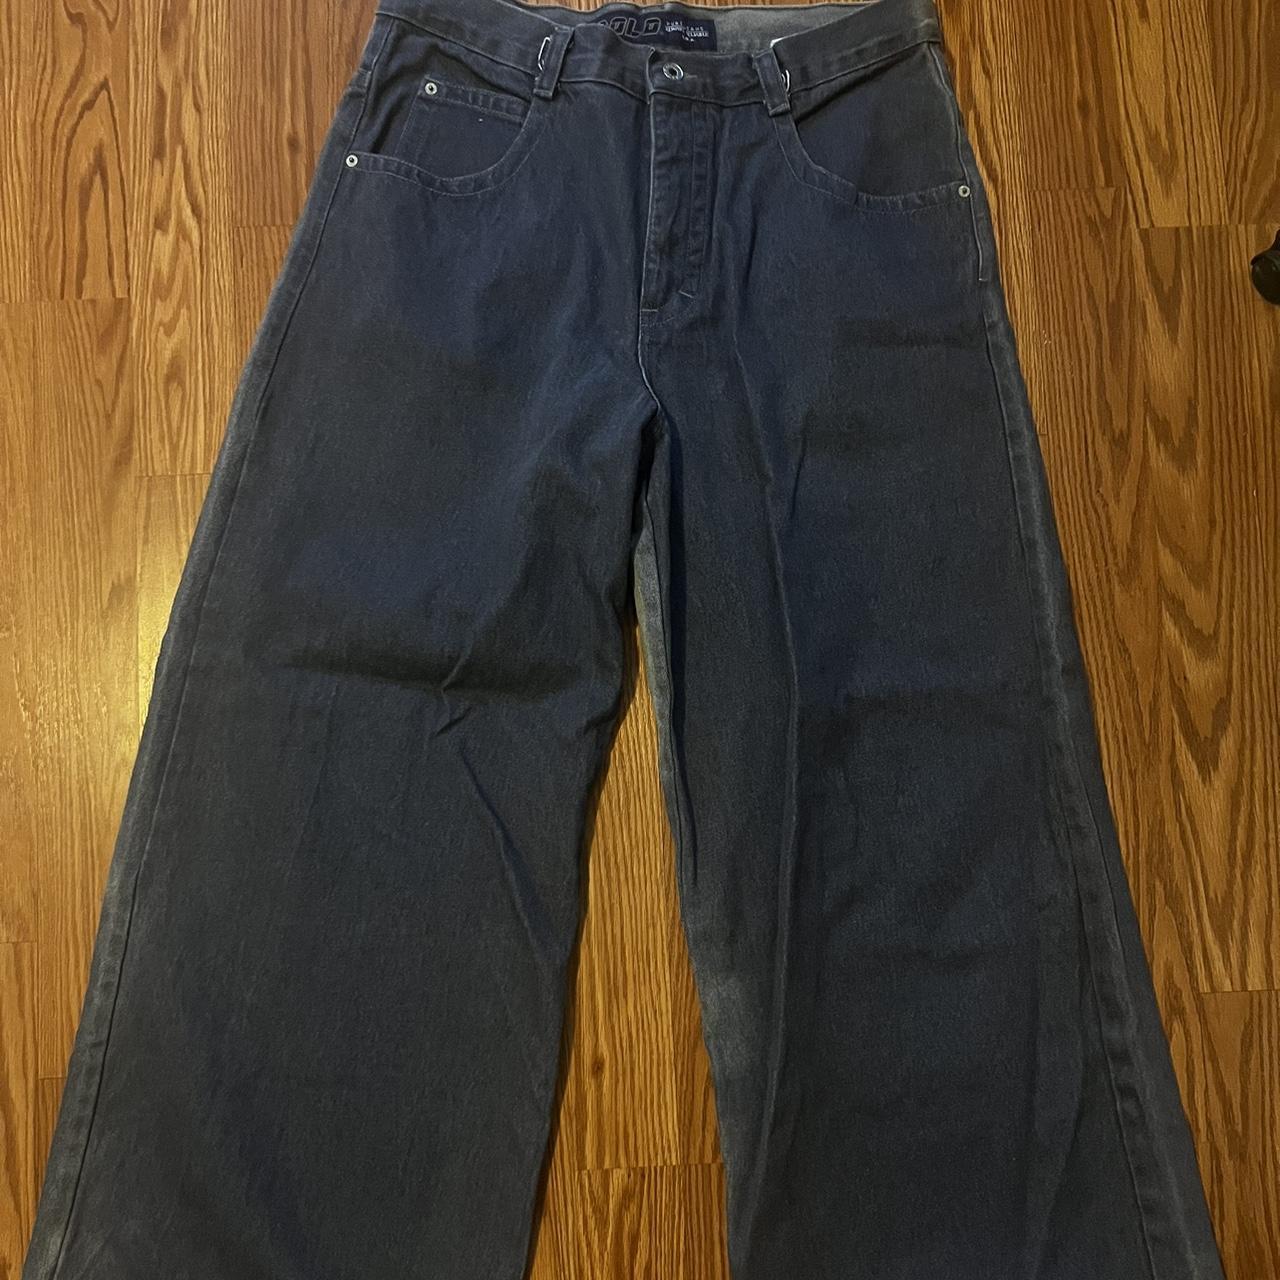 SOLO SEMORE JEANS super dope pair of solo jeans... - Depop